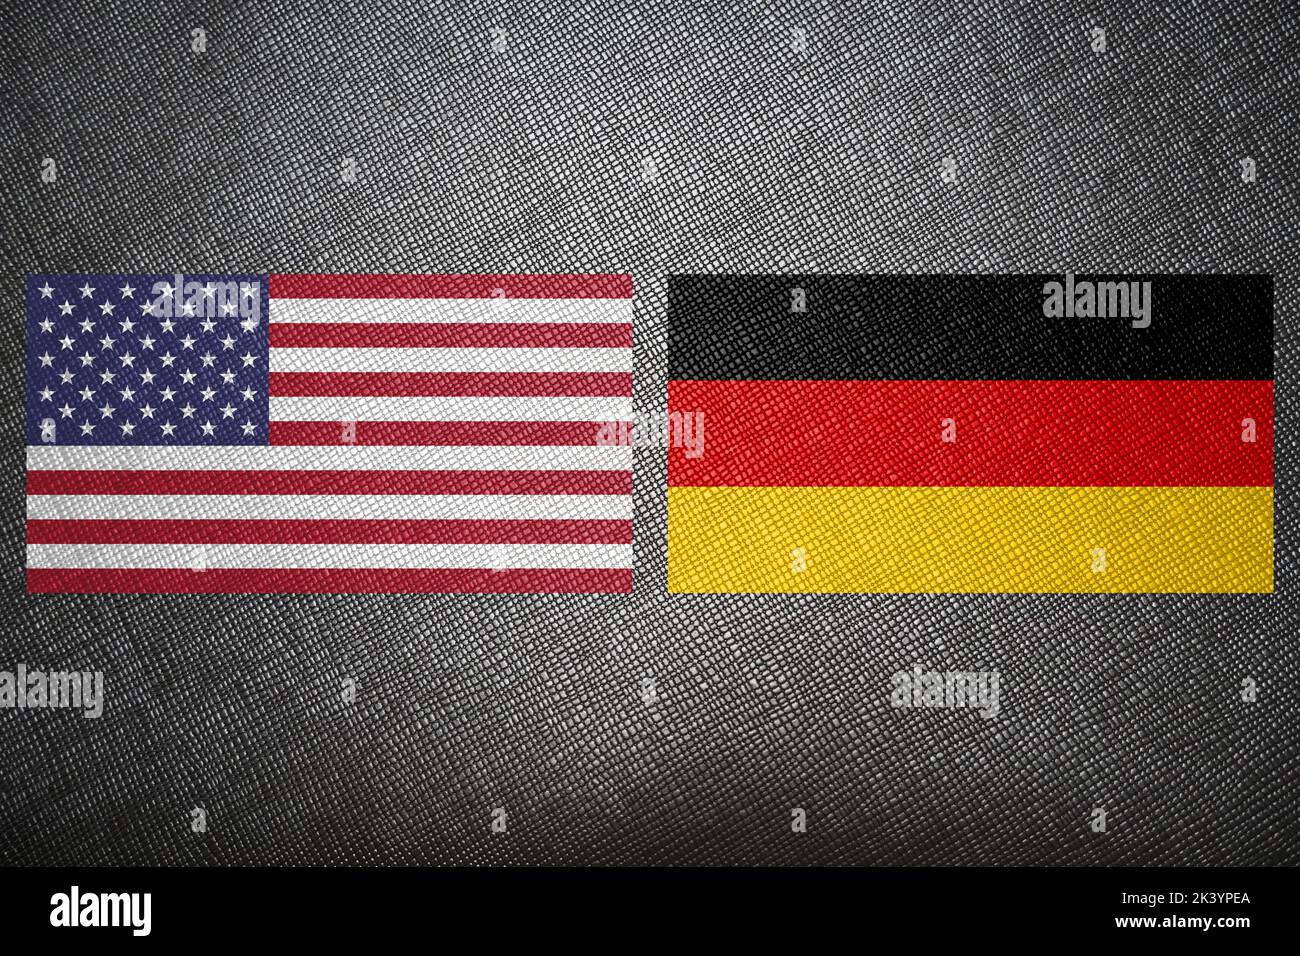 3D illustration, United States and Germany alliance and meeting, cooperation of states. Germany Flag US Flag texture. Stock Photo